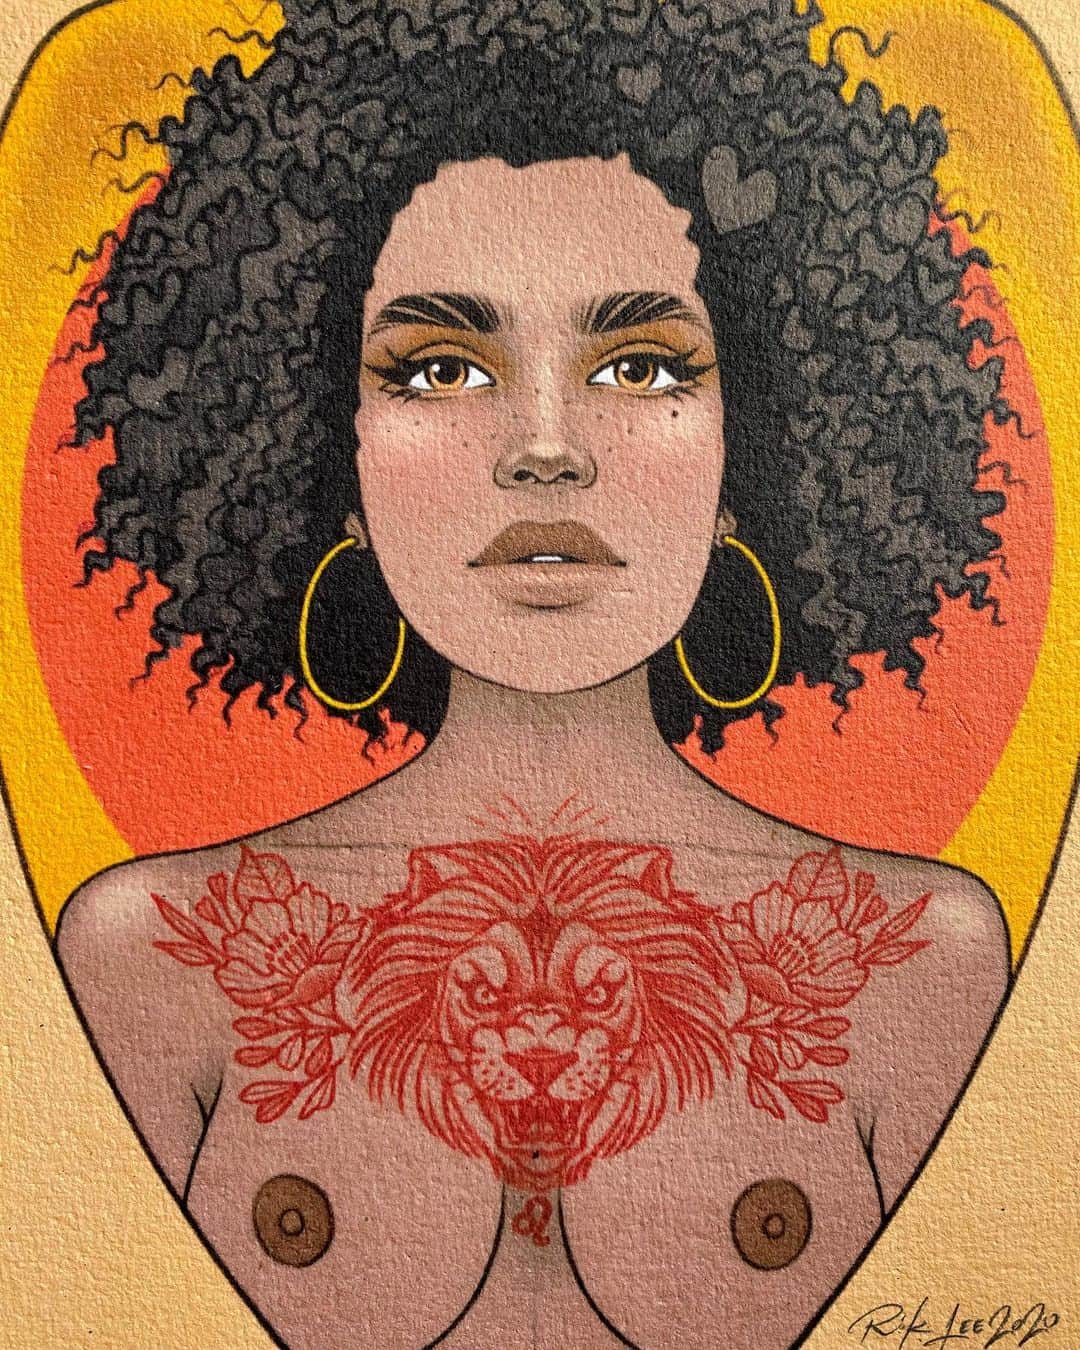 Rik Leeのインスタグラム：「A few more photos of Leo, the most recent piece in my  ongoing zodiac series.  . Fine art prints are listed on my store for anyone interested. Virgo, Libra, Capricorn, Scorpio and Sagittarius prints are on there too. More zodiac babes coming soon! . #riklee #illustration #leo #zodiac #starsign #drawing #art #design #tarot #naturalhair #lion #tattoo」